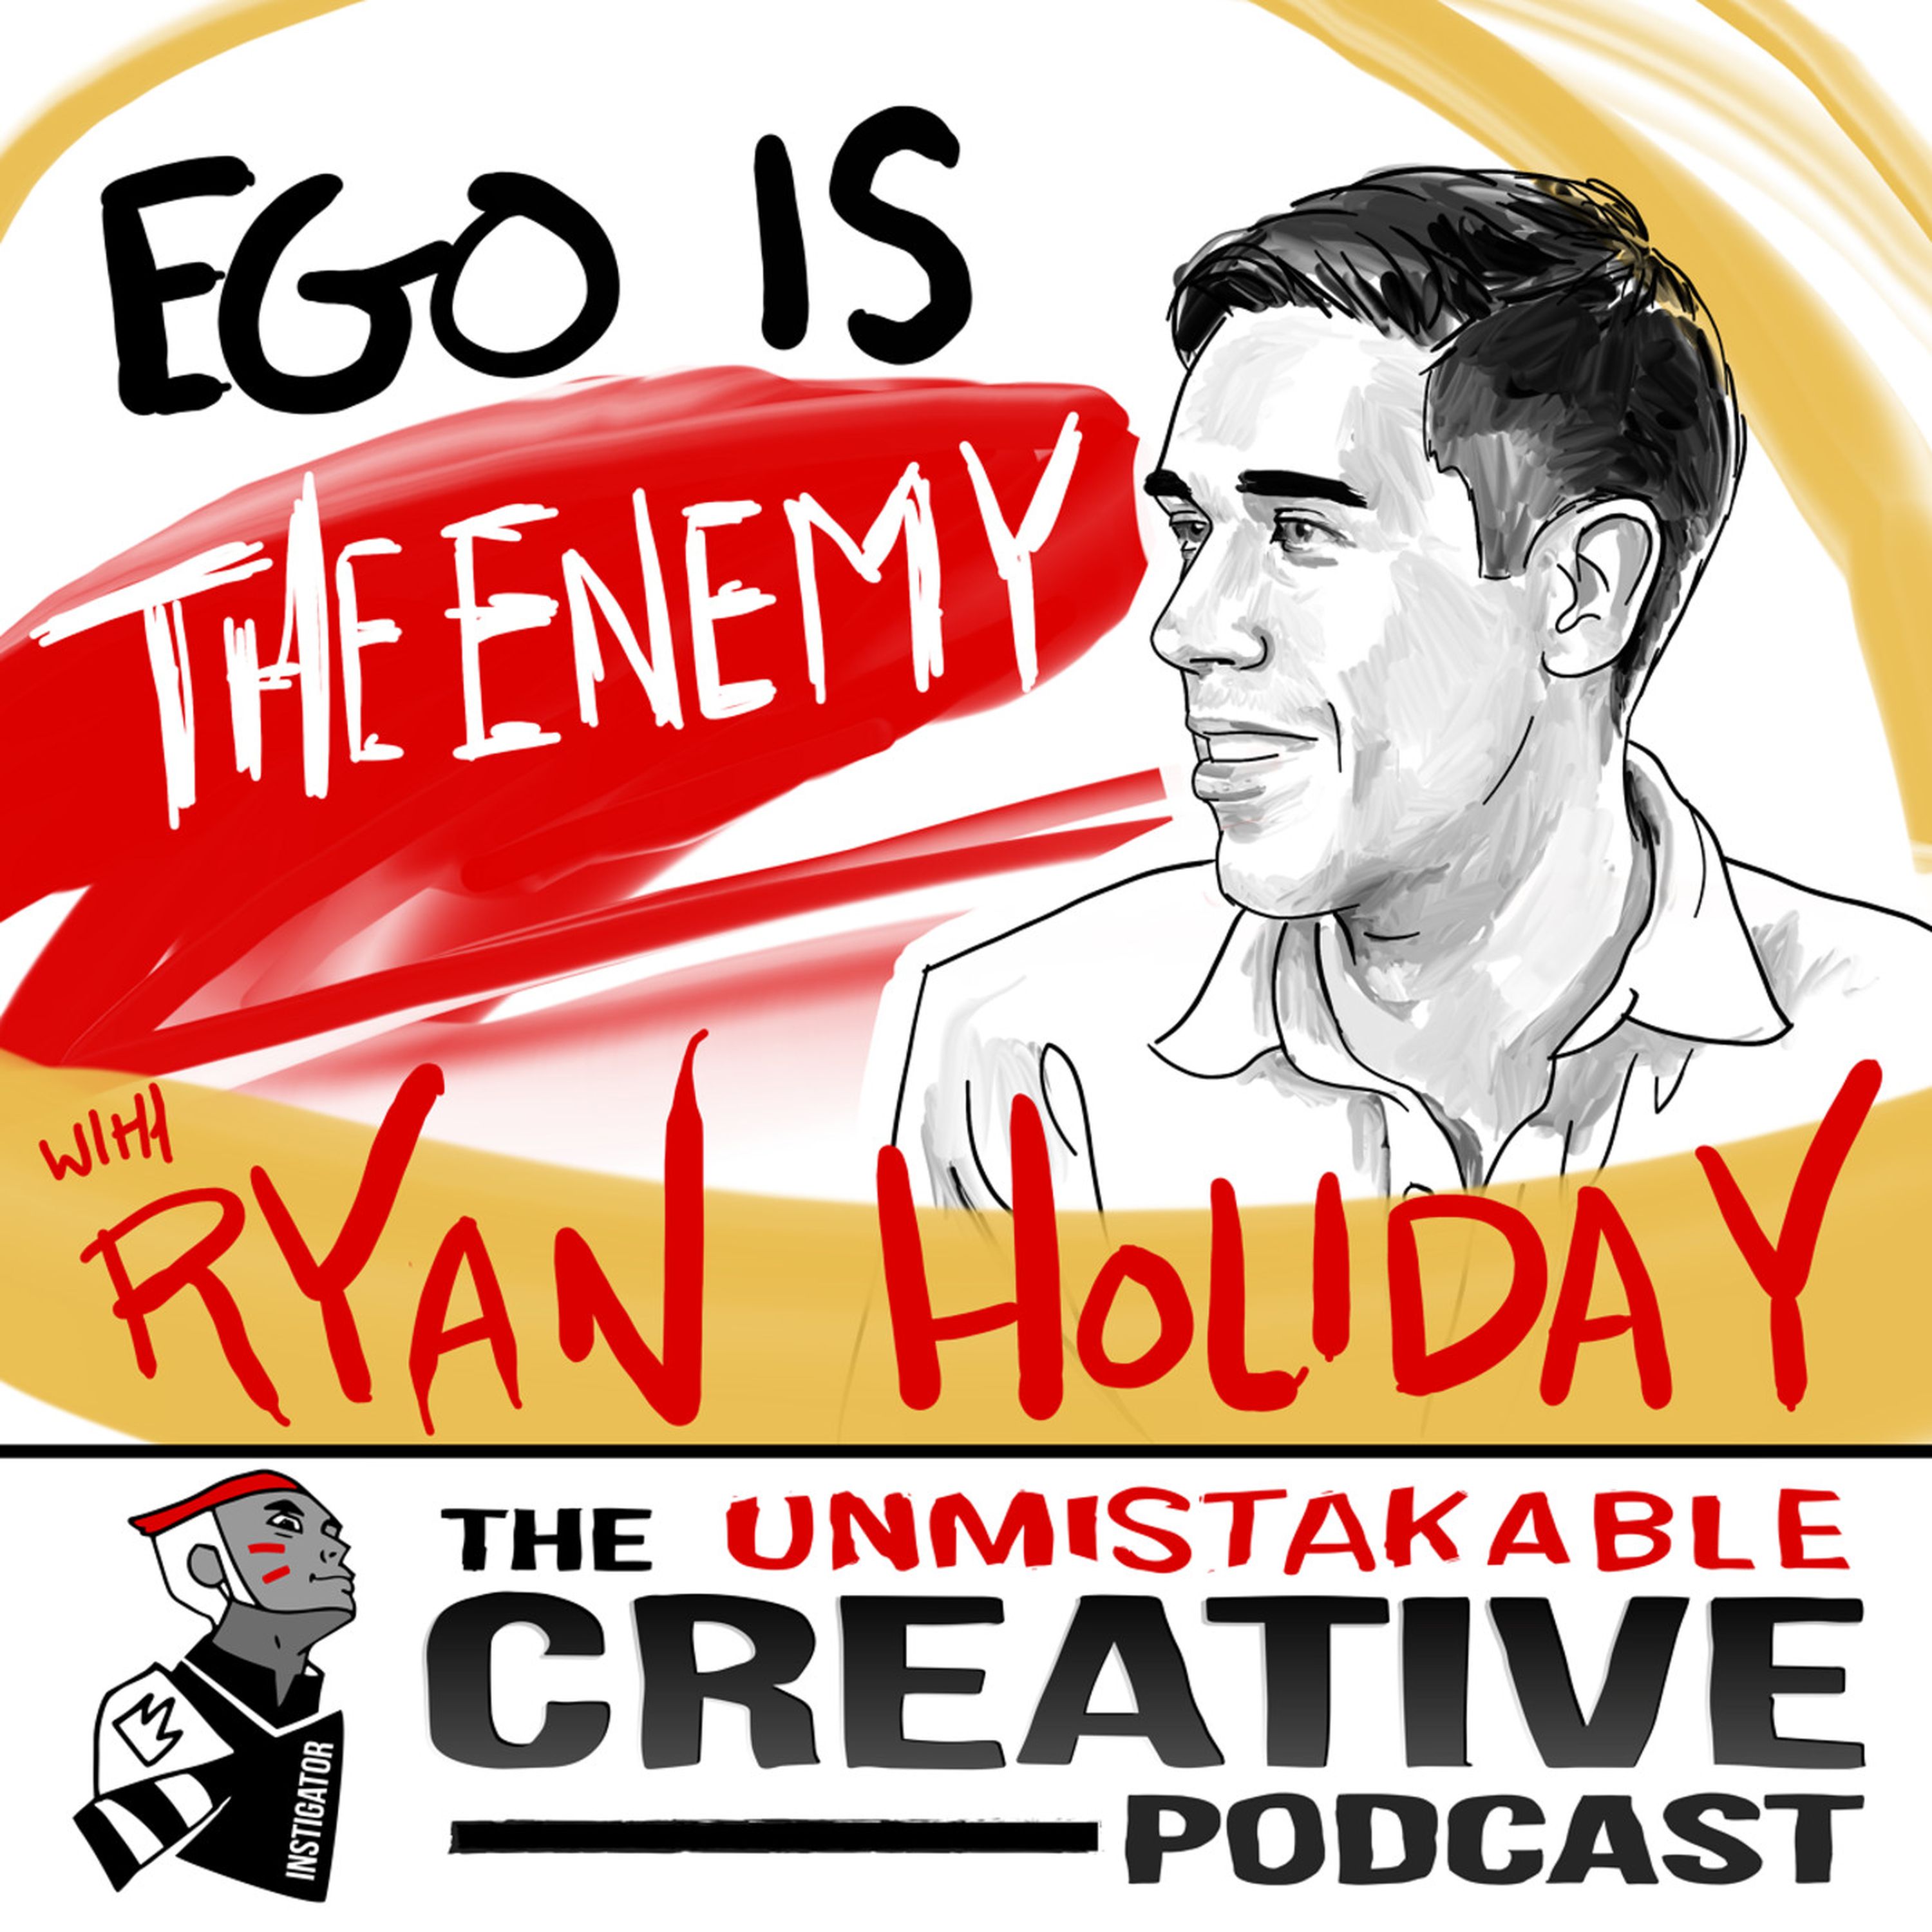 Best of: Ego is The Enemy with Ryan Holiday